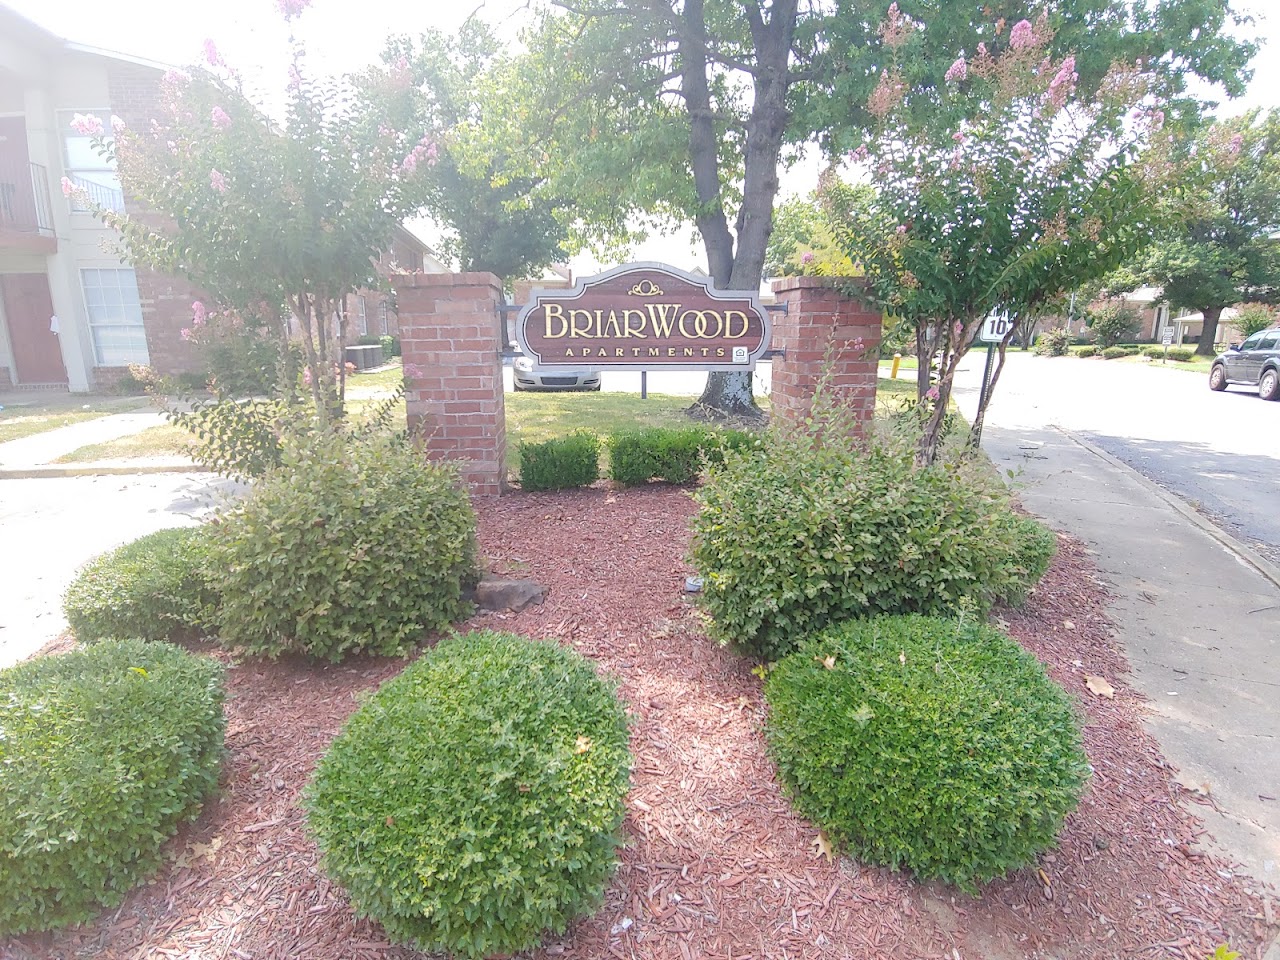 Photo of BRIARWOOD APARTMENTS. Affordable housing located at 3400 DUKE AVE FORT SMITH, AR 72903